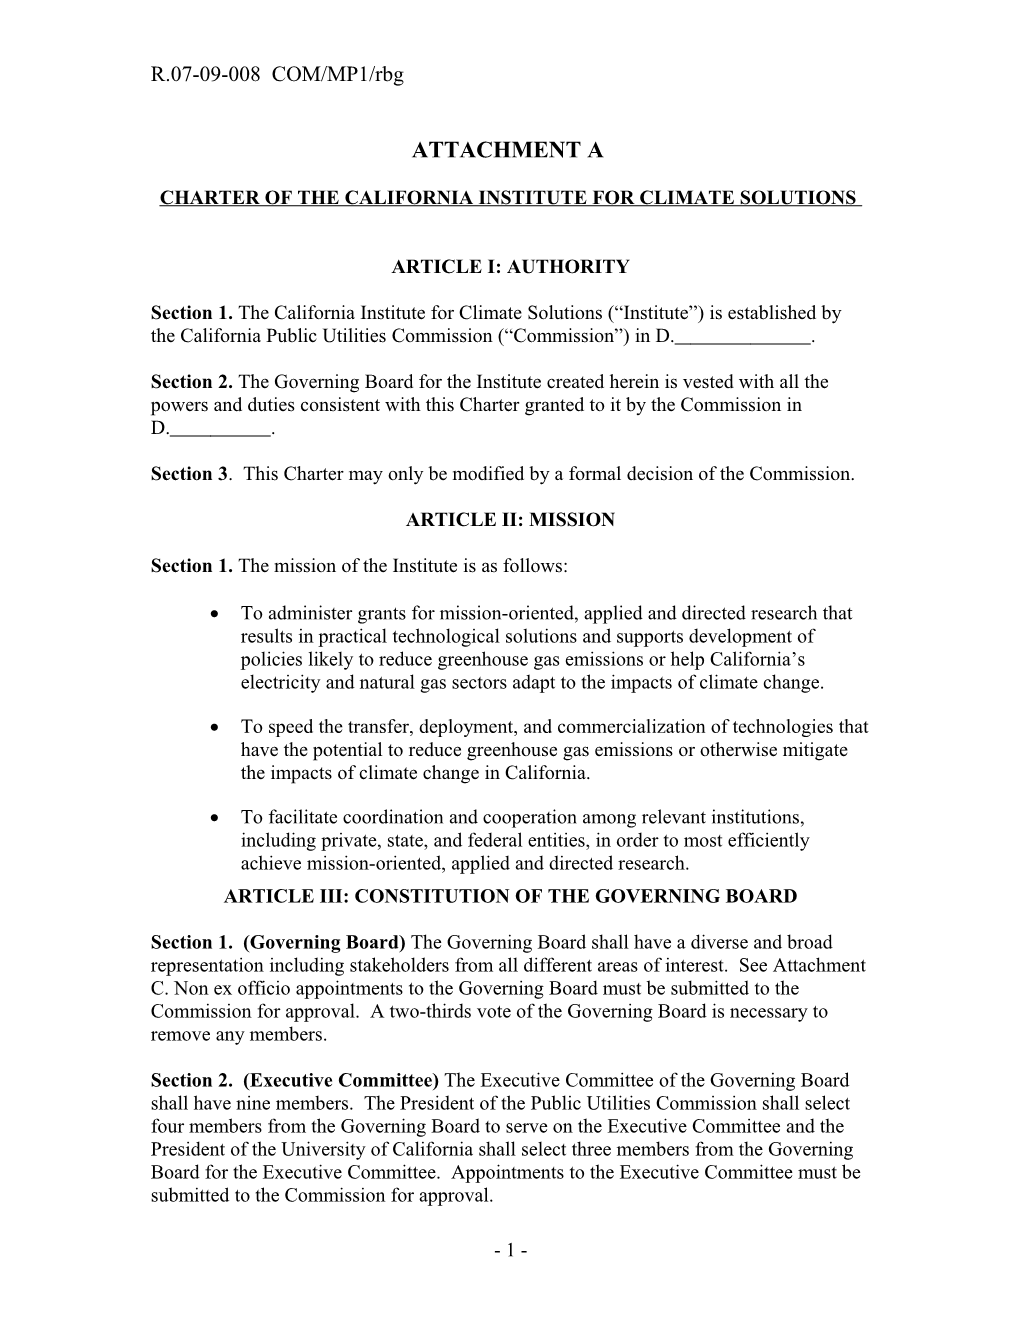 Charter of the California Institute for Climate Solutions